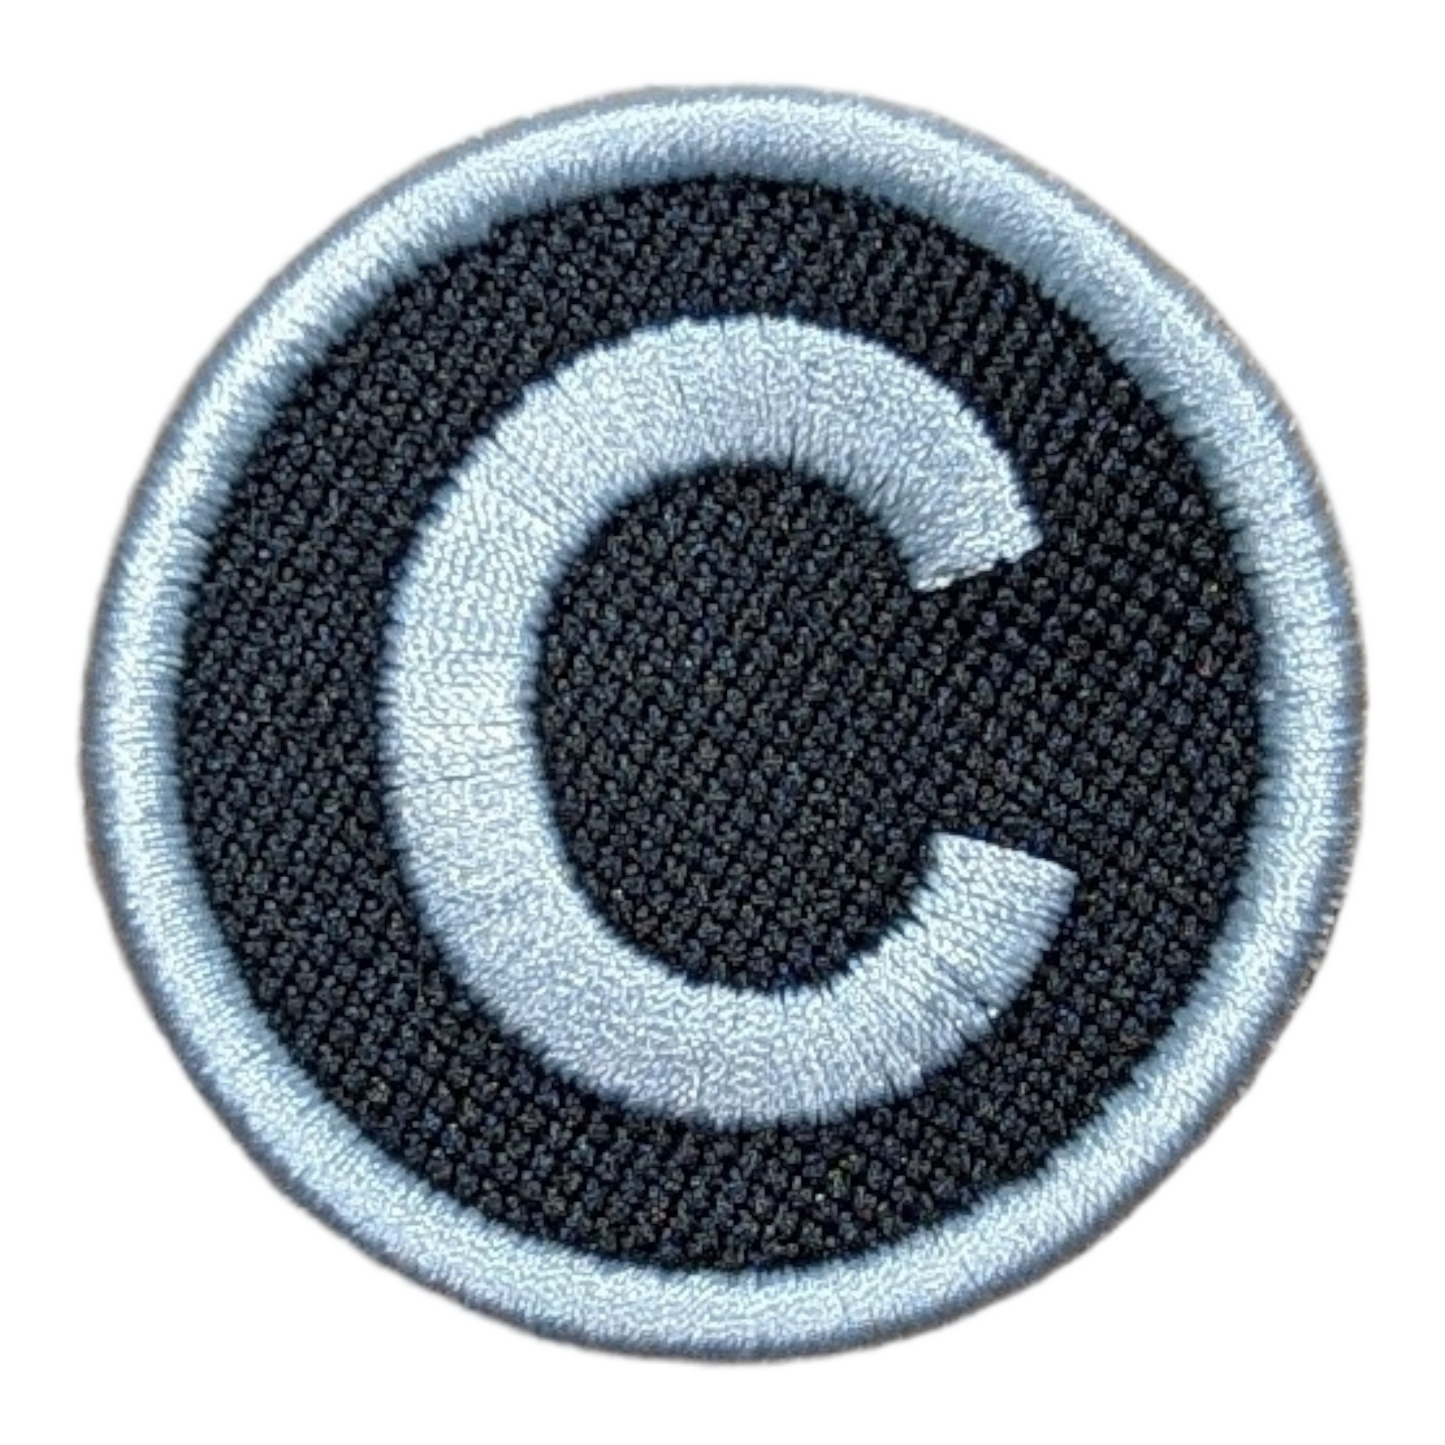 Custom 2" Round Patch - Hook Backing - Captains Patch